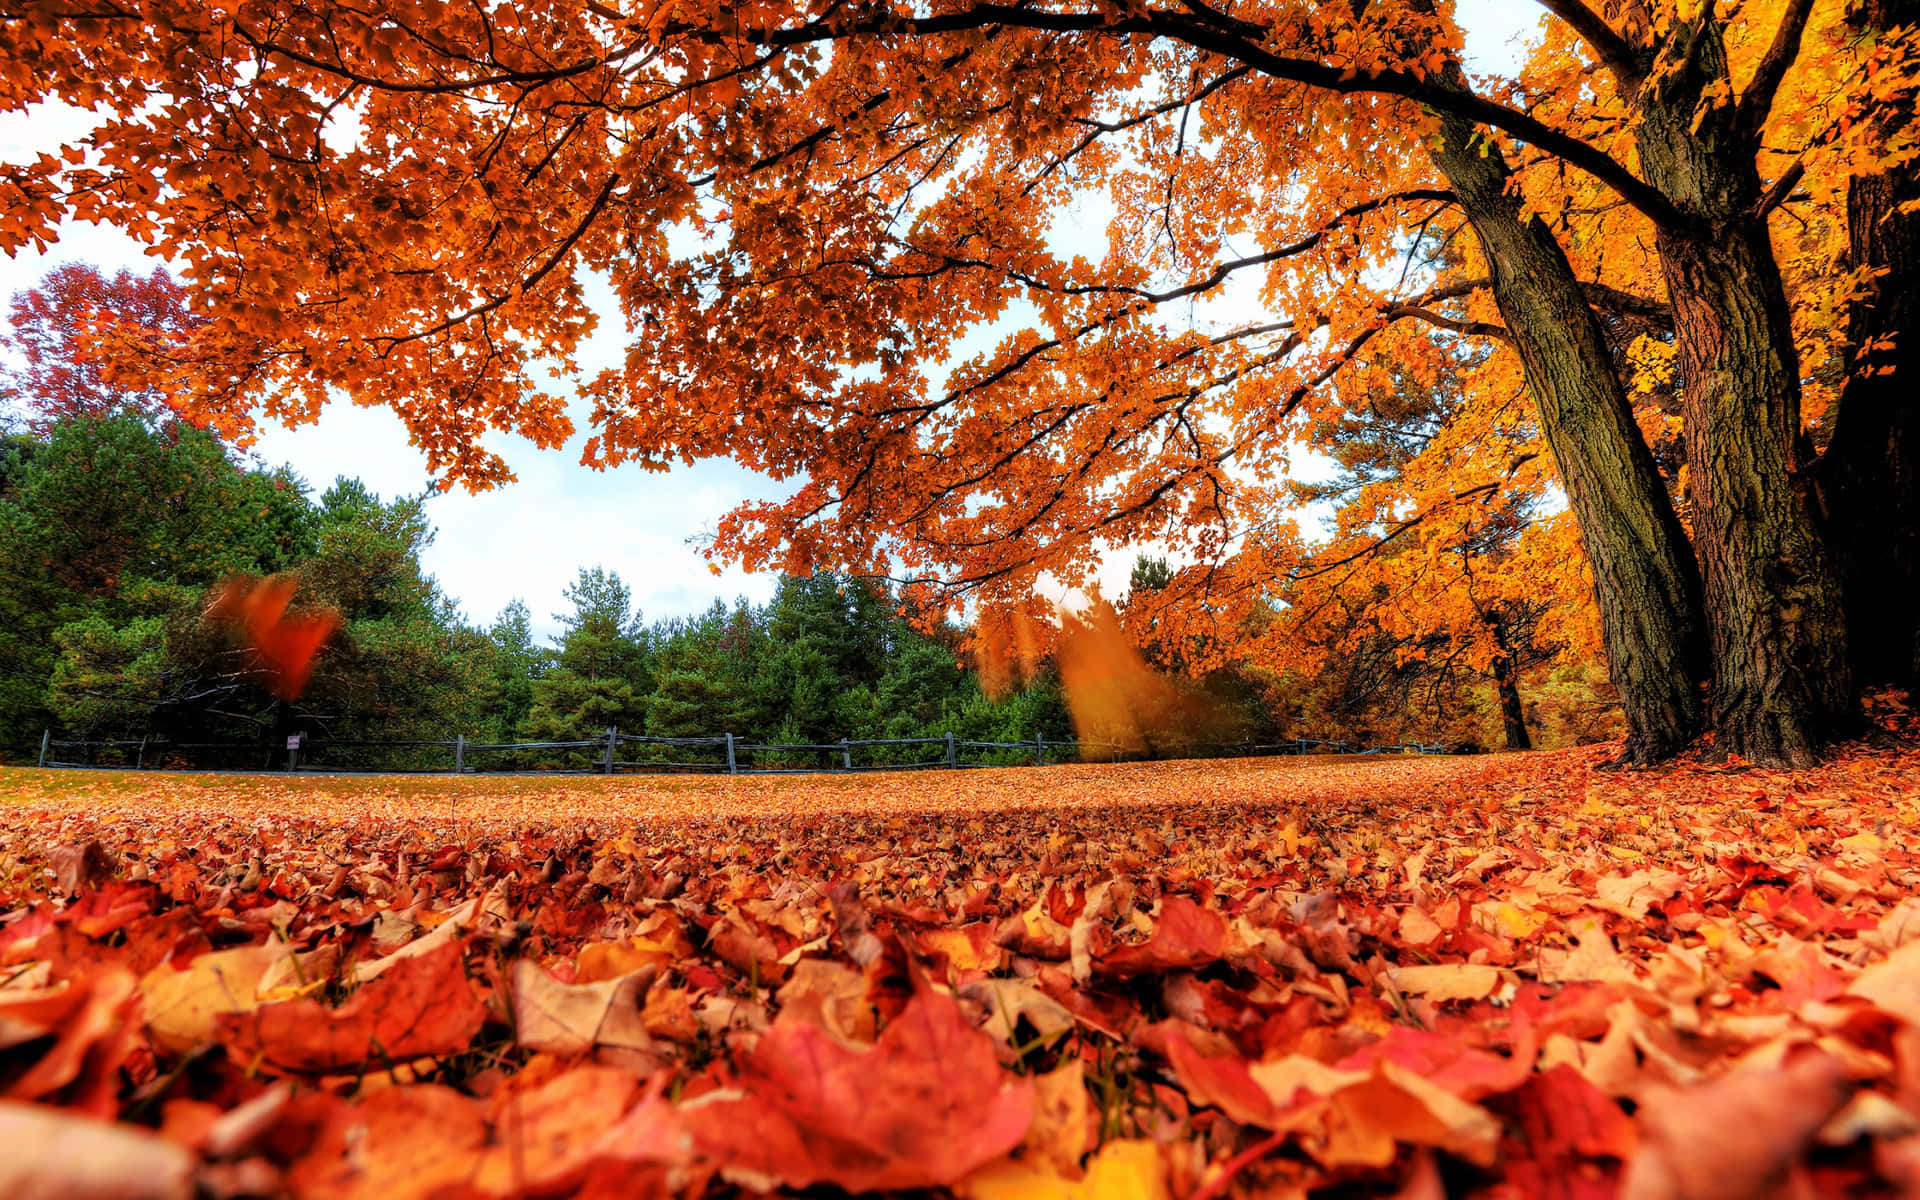 Image  Clusters of Colorful Fall Leaves Against a Green Forestry Background